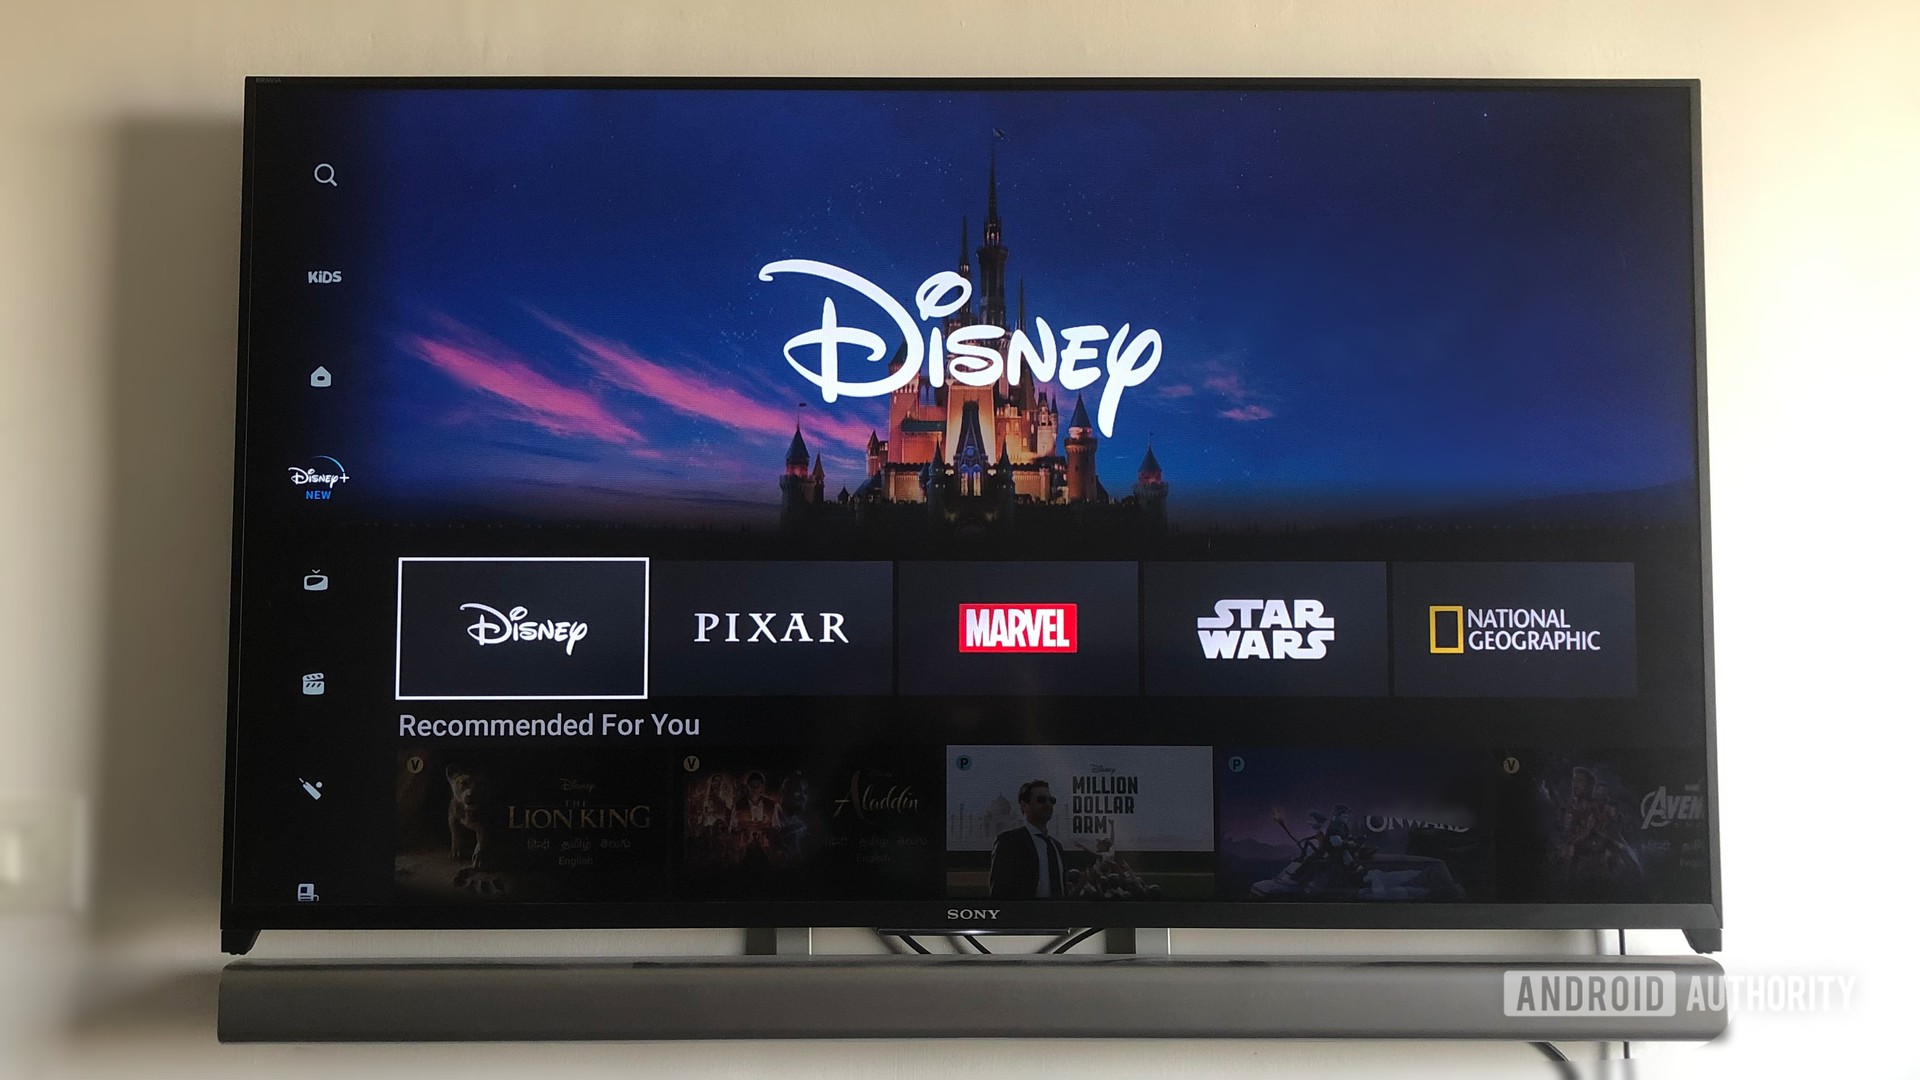 Disney Plus Hotstar On Android TV Prime Day